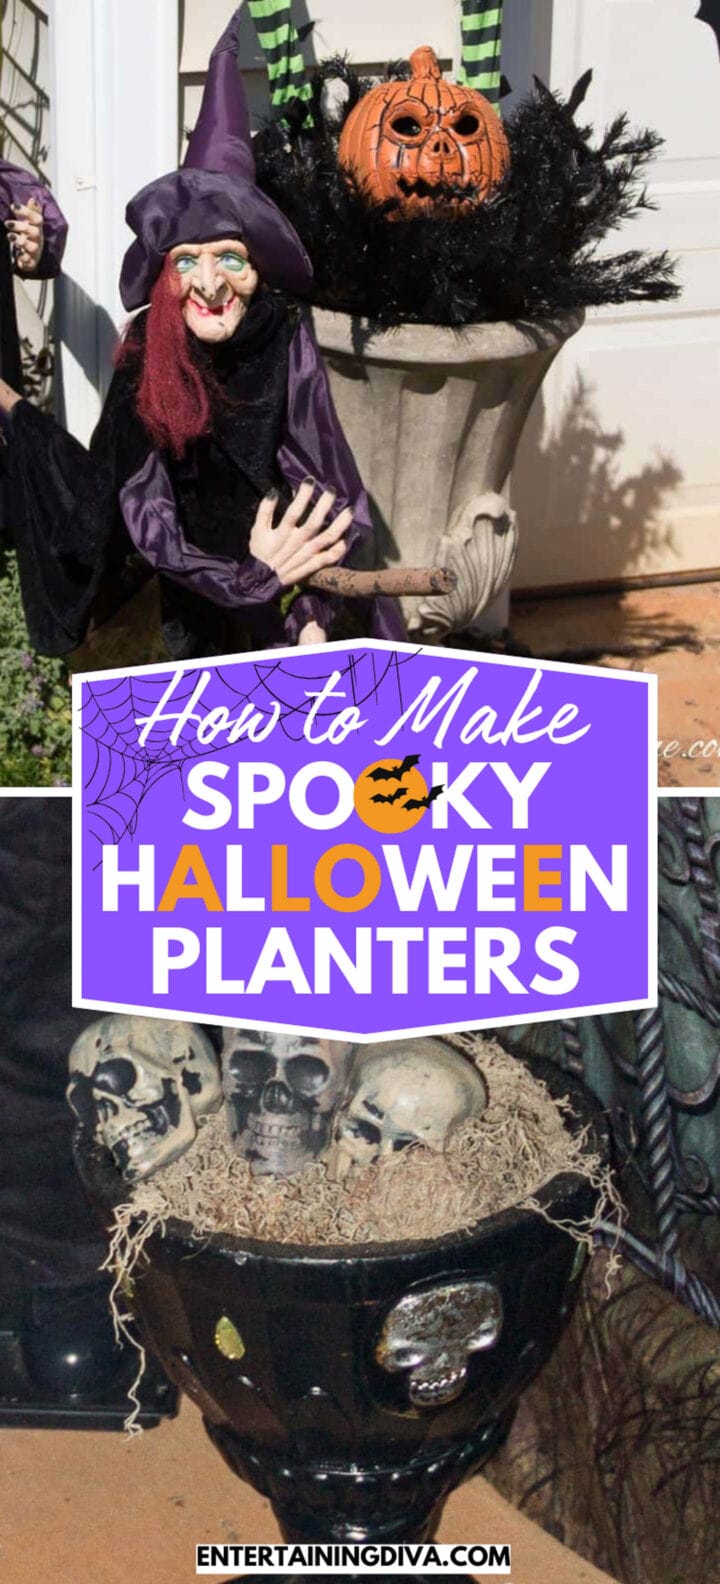 Halloween-themed planters: a guide on making festive decorations for the spooky season.